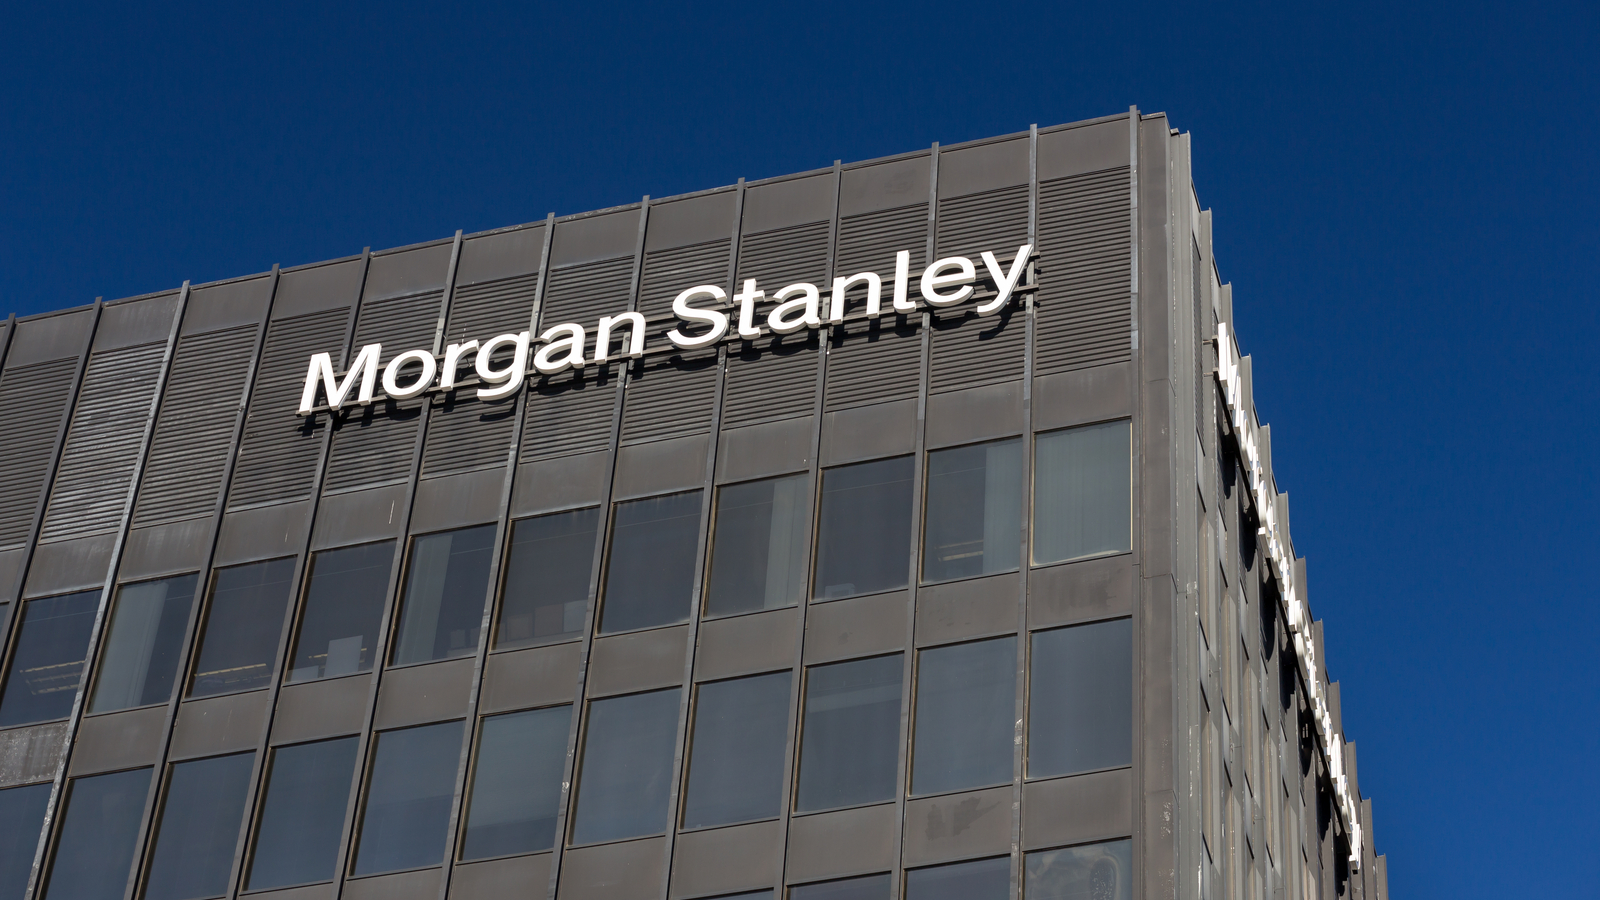 3 Morgan Stanley Stock Picks With Room to Run